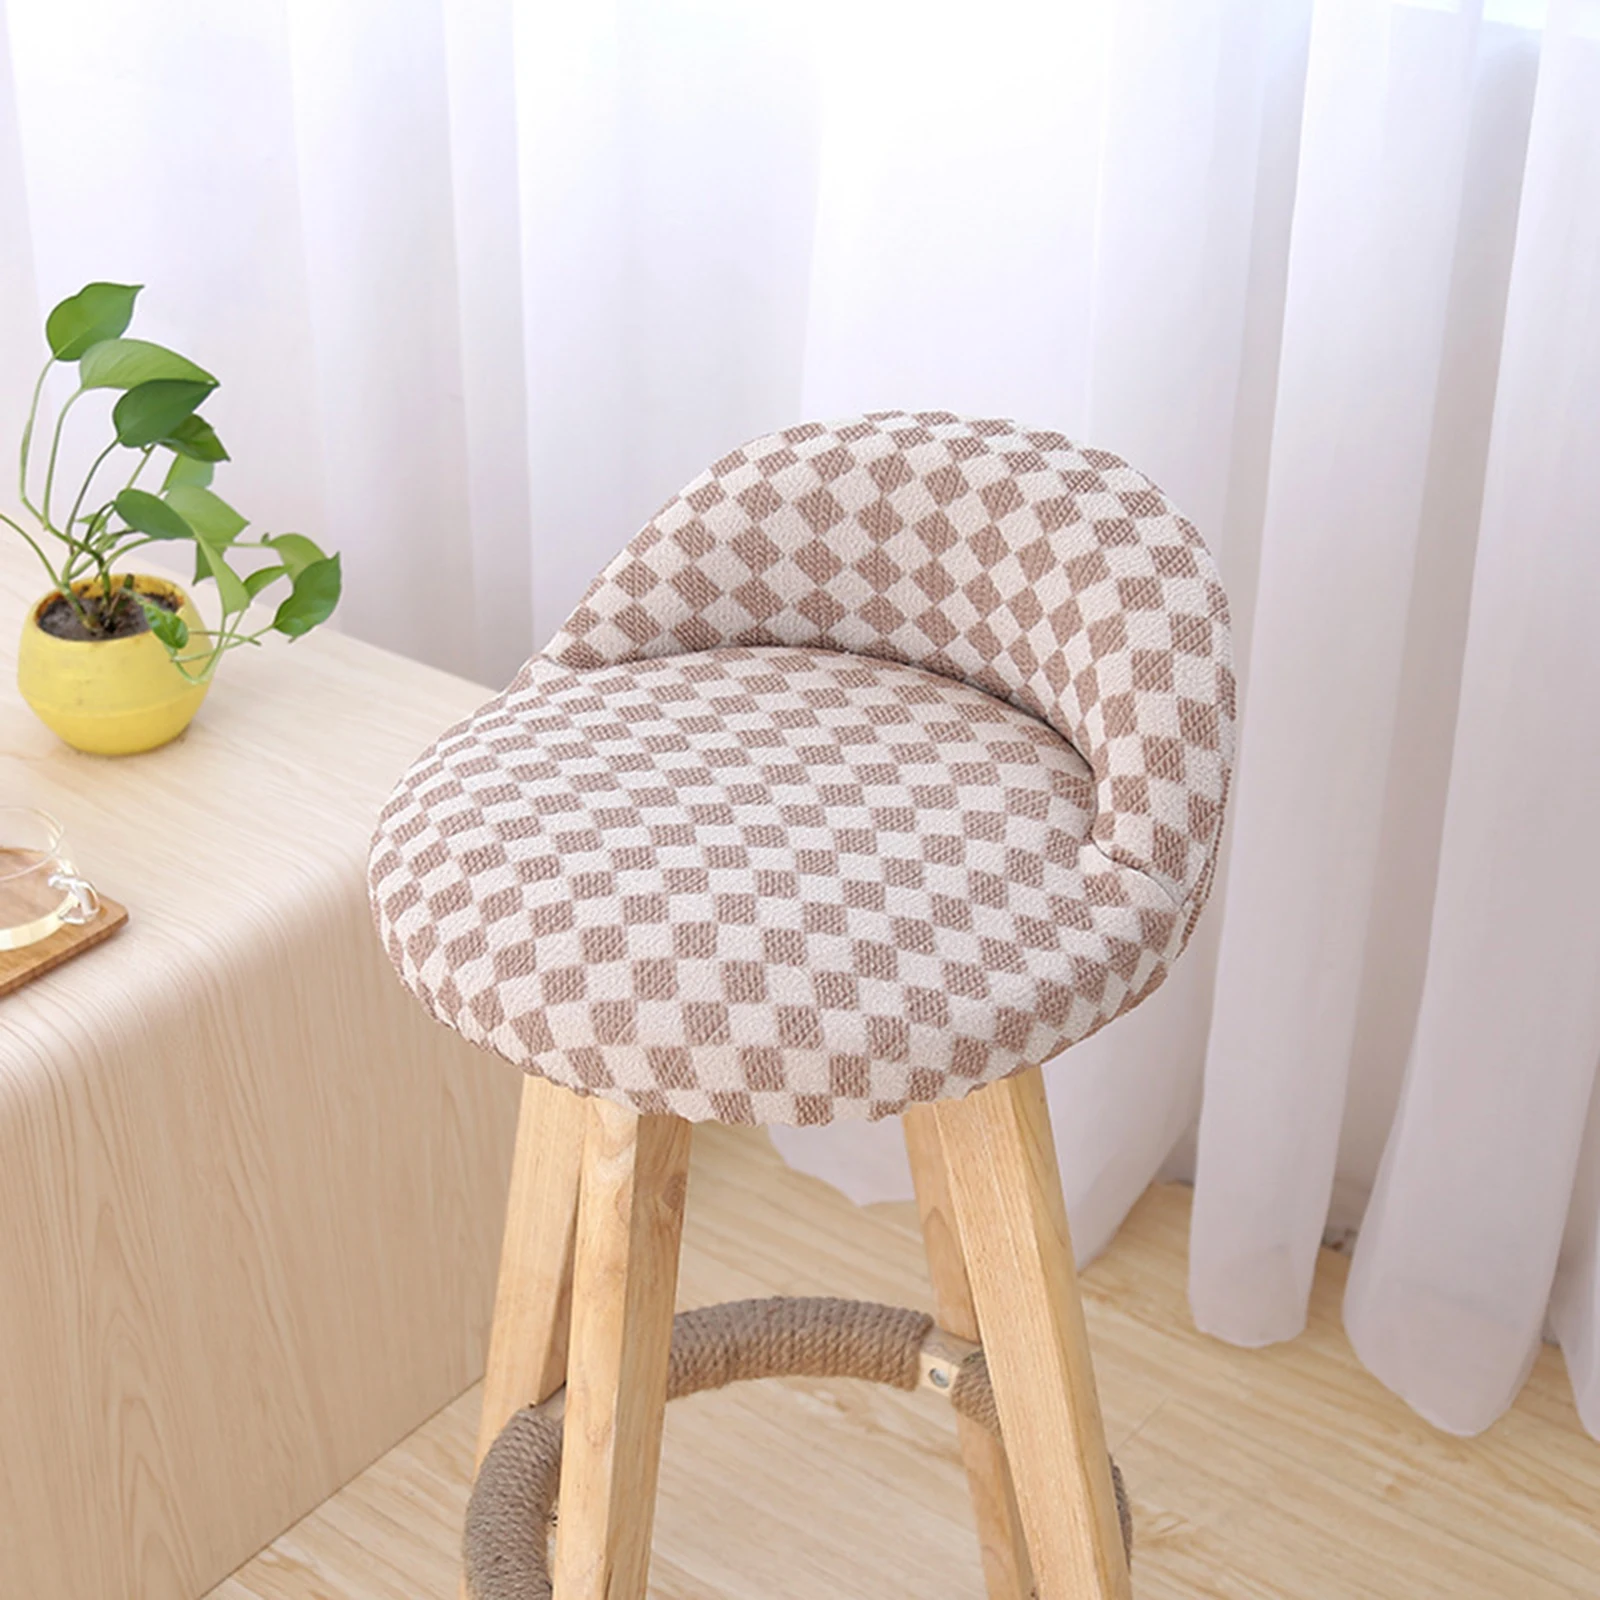 Slipcover Removable Anti-dirty Seat Chair Cover Kitchen Chair Cover Bar Stool Slipover Low Back Seat Protector Protection